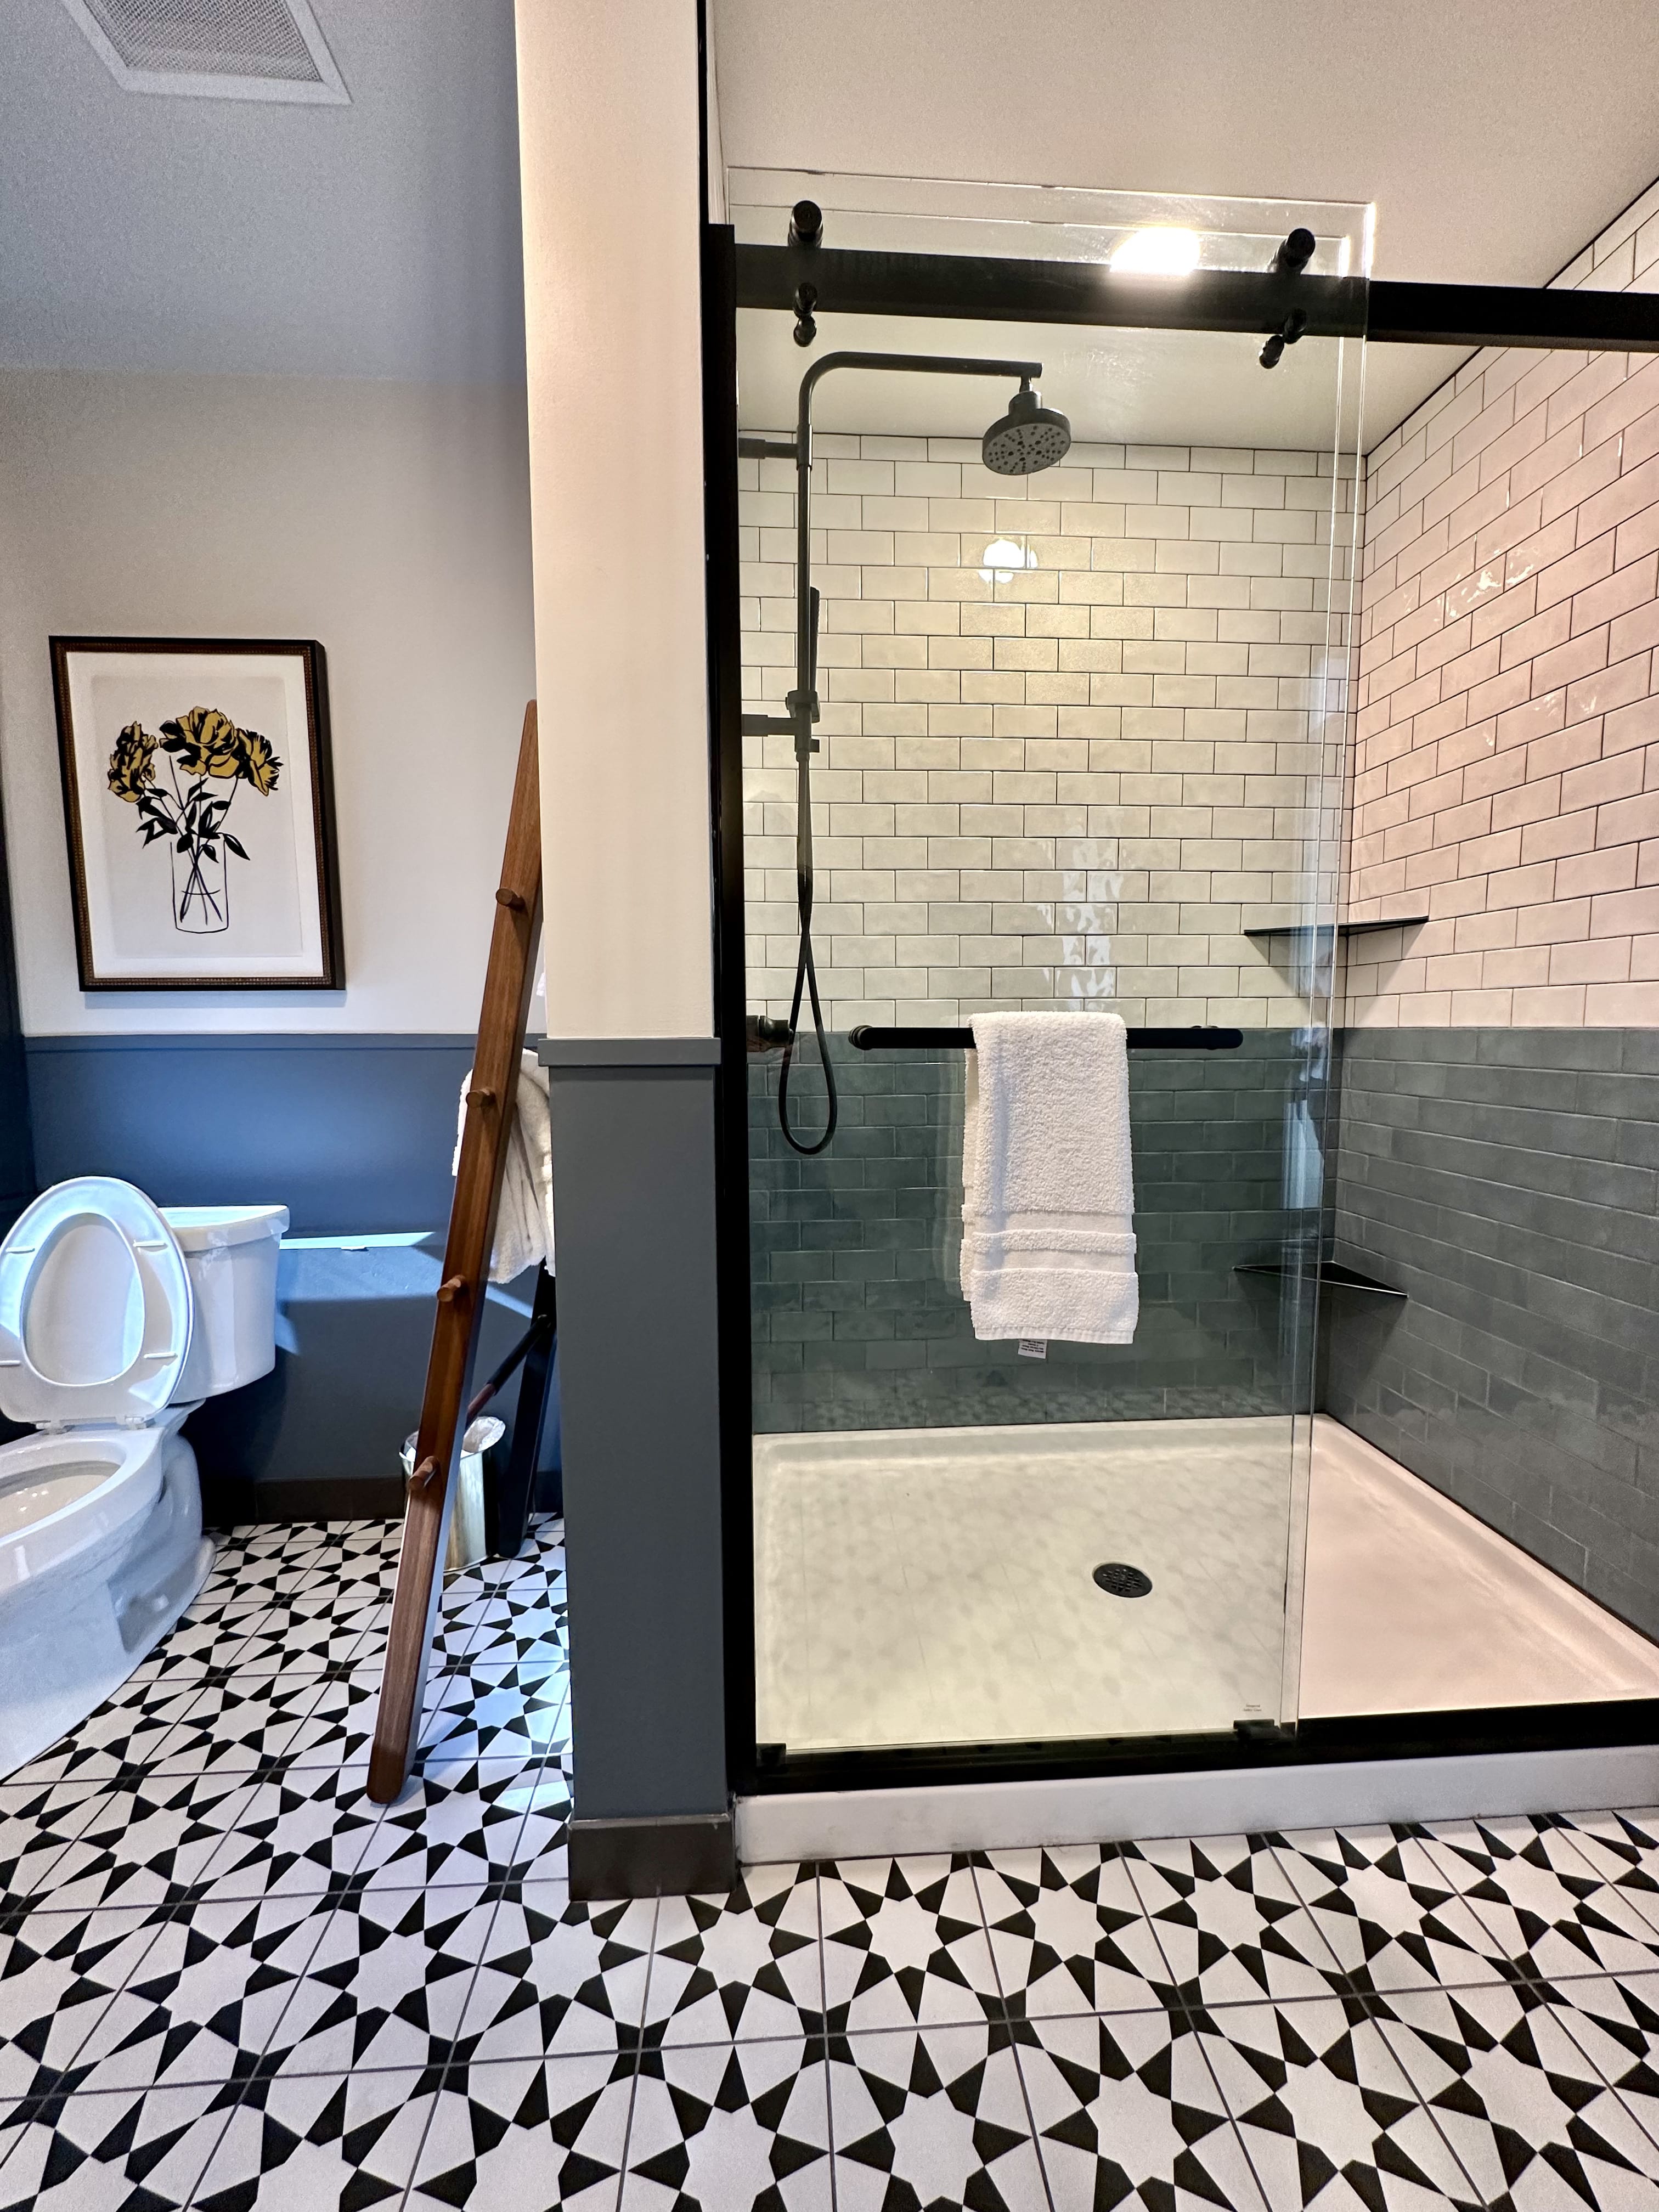 Shower room interior with tiles | Kelly's Carpet Omaha